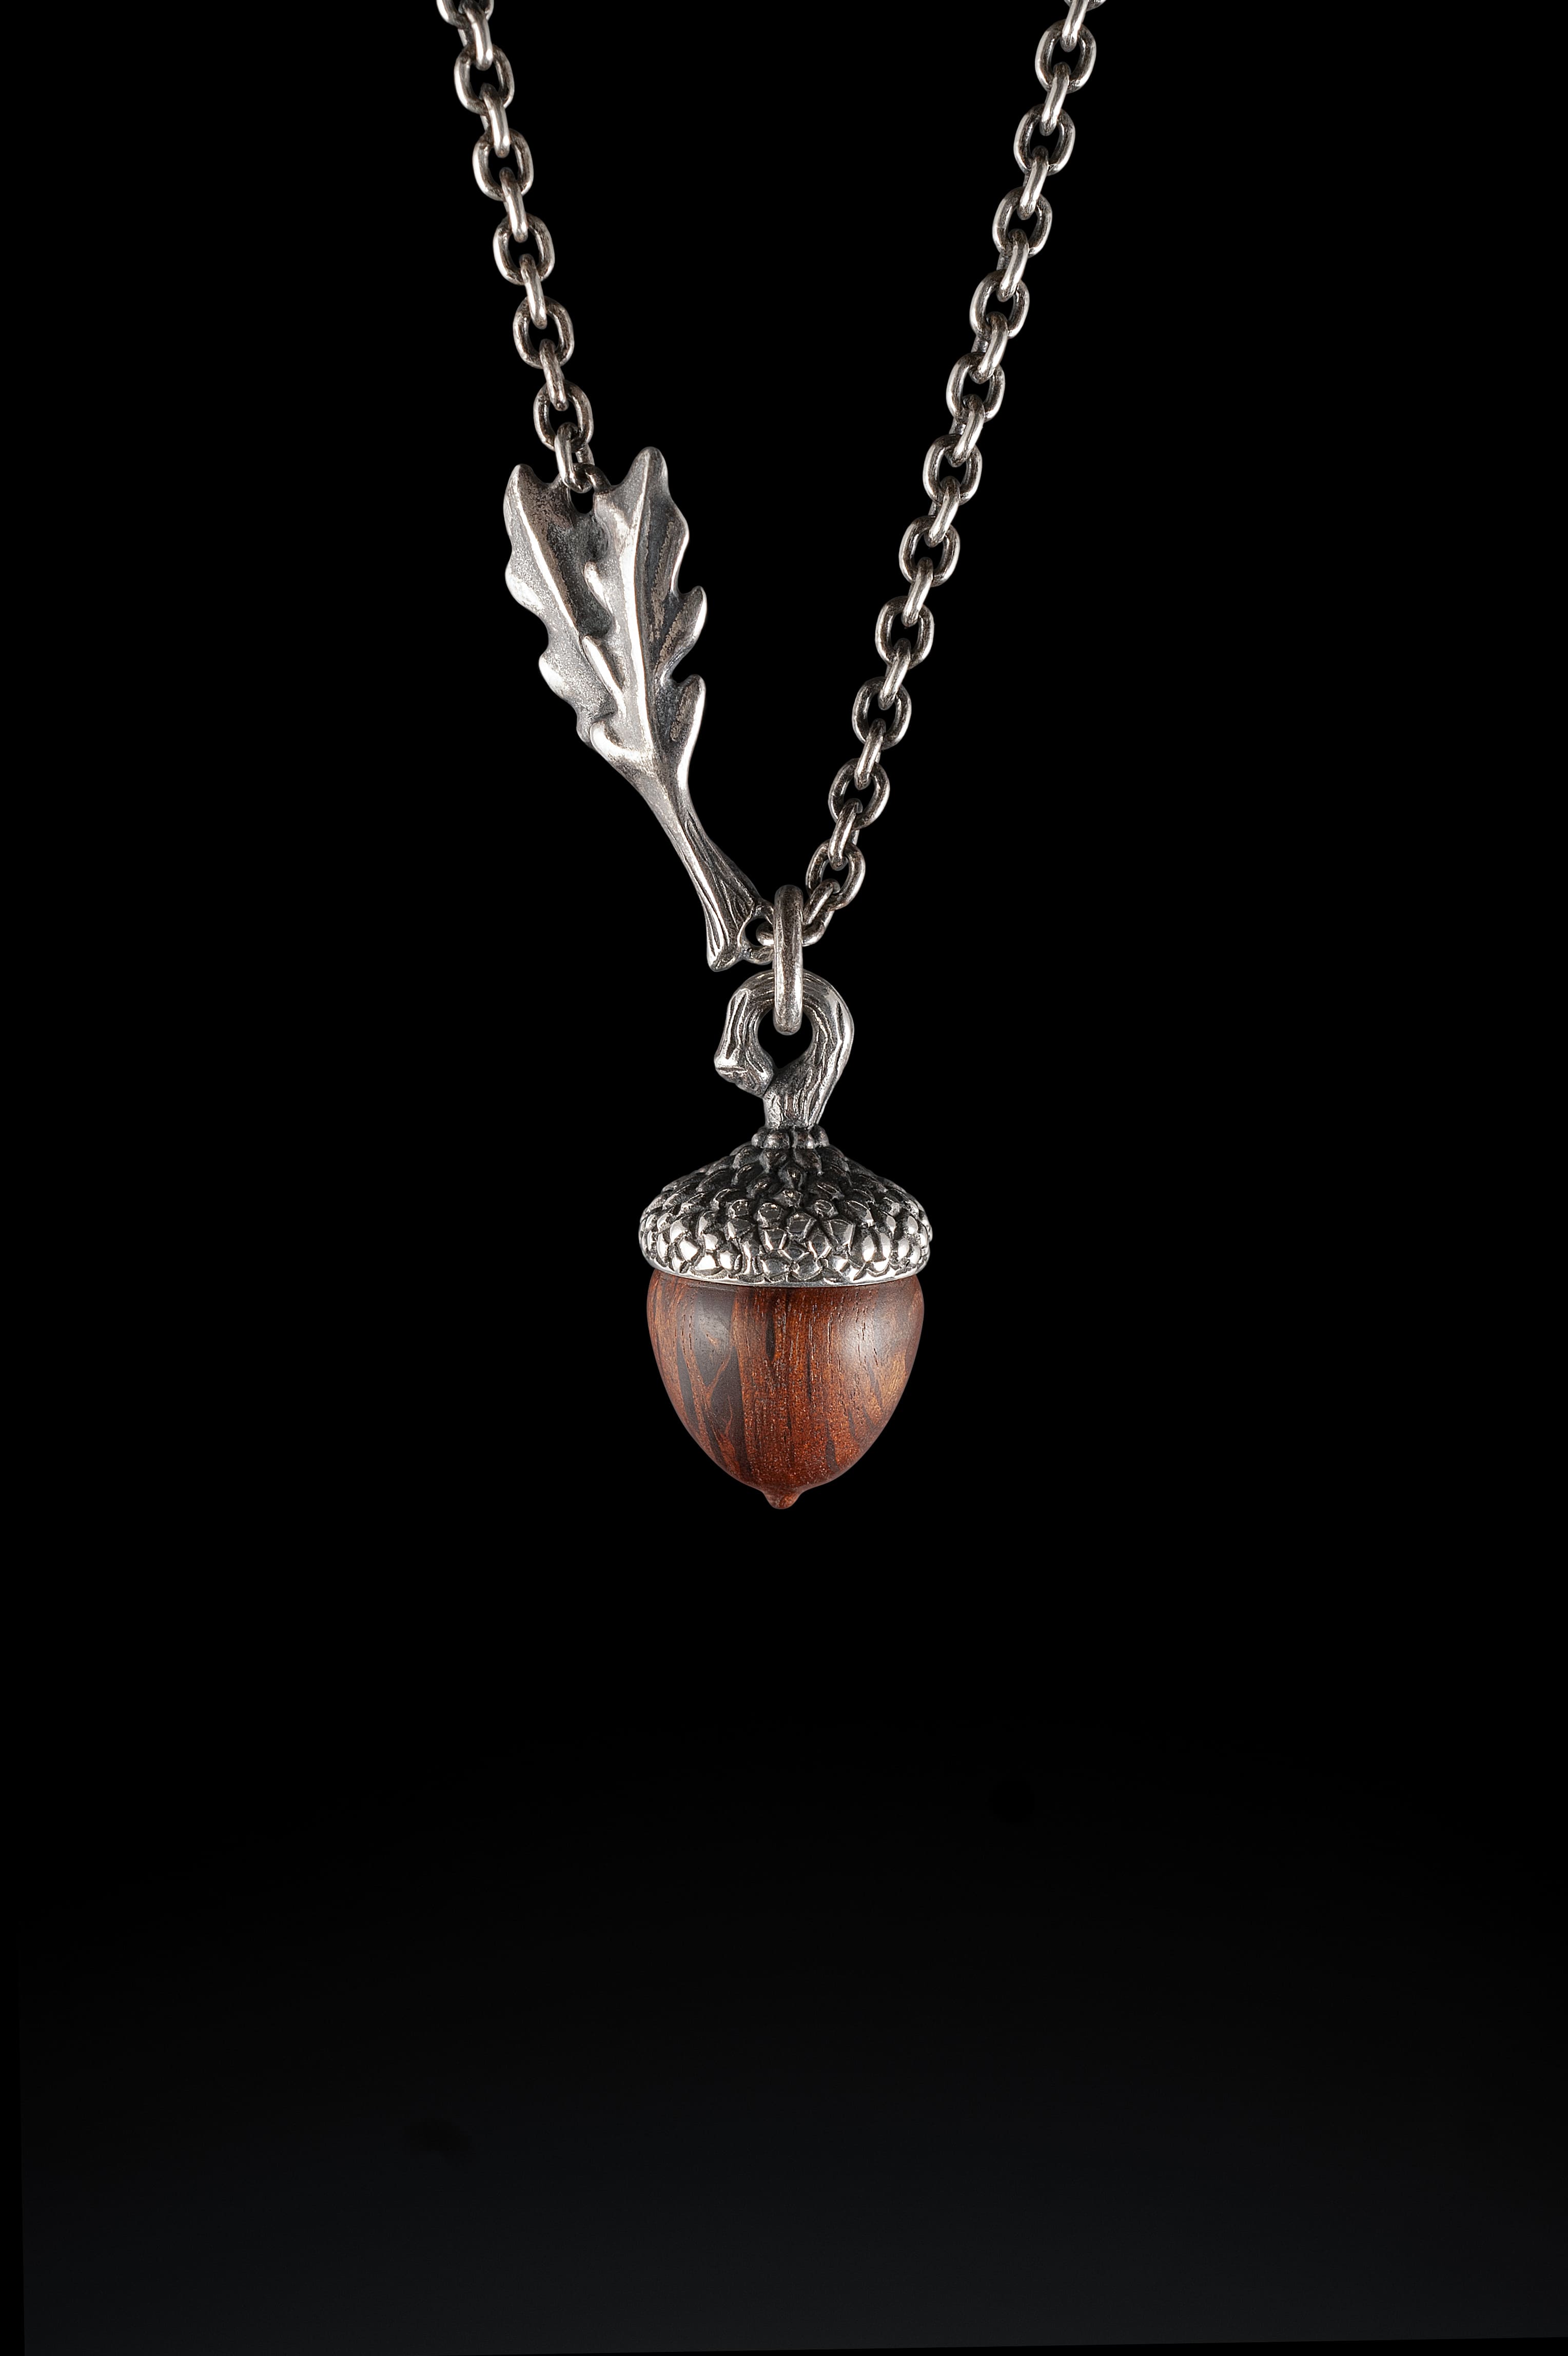 Acorn Necklace with Oak Leaves on a Sterling Silver chain. The Acorn itself is hand carved in timber.